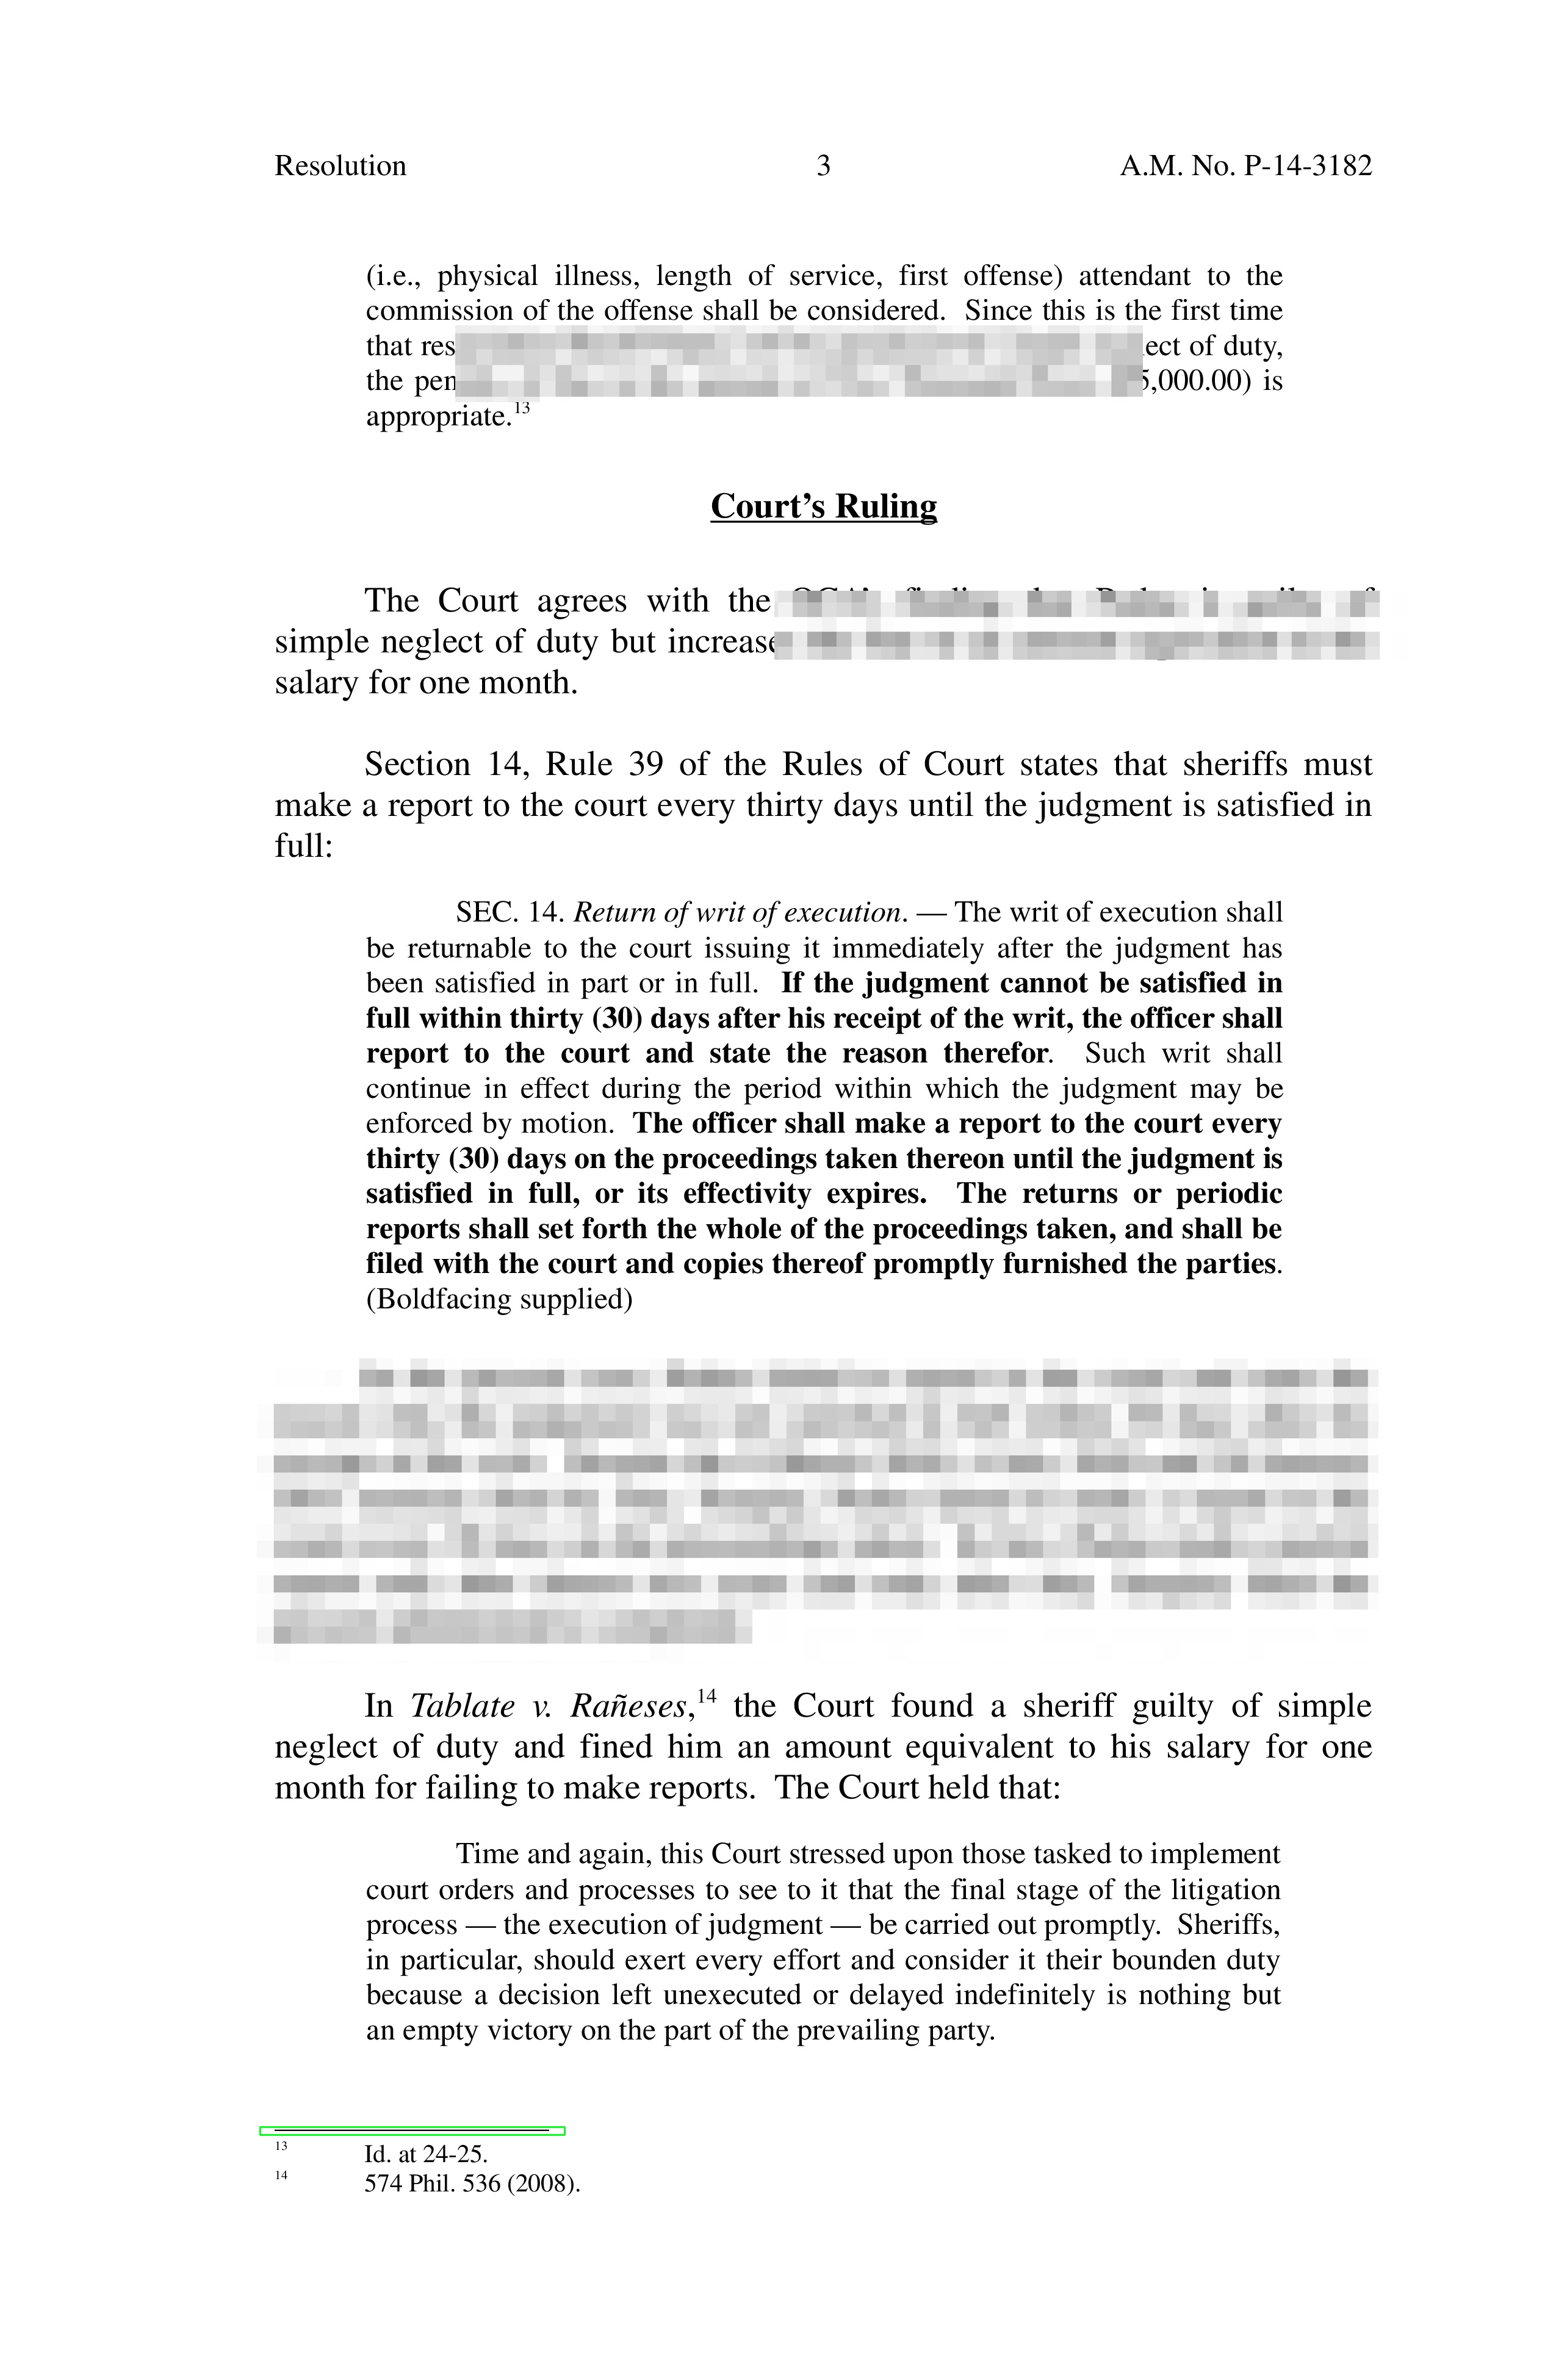 A page of a Supreme Court decision formatted in PDF